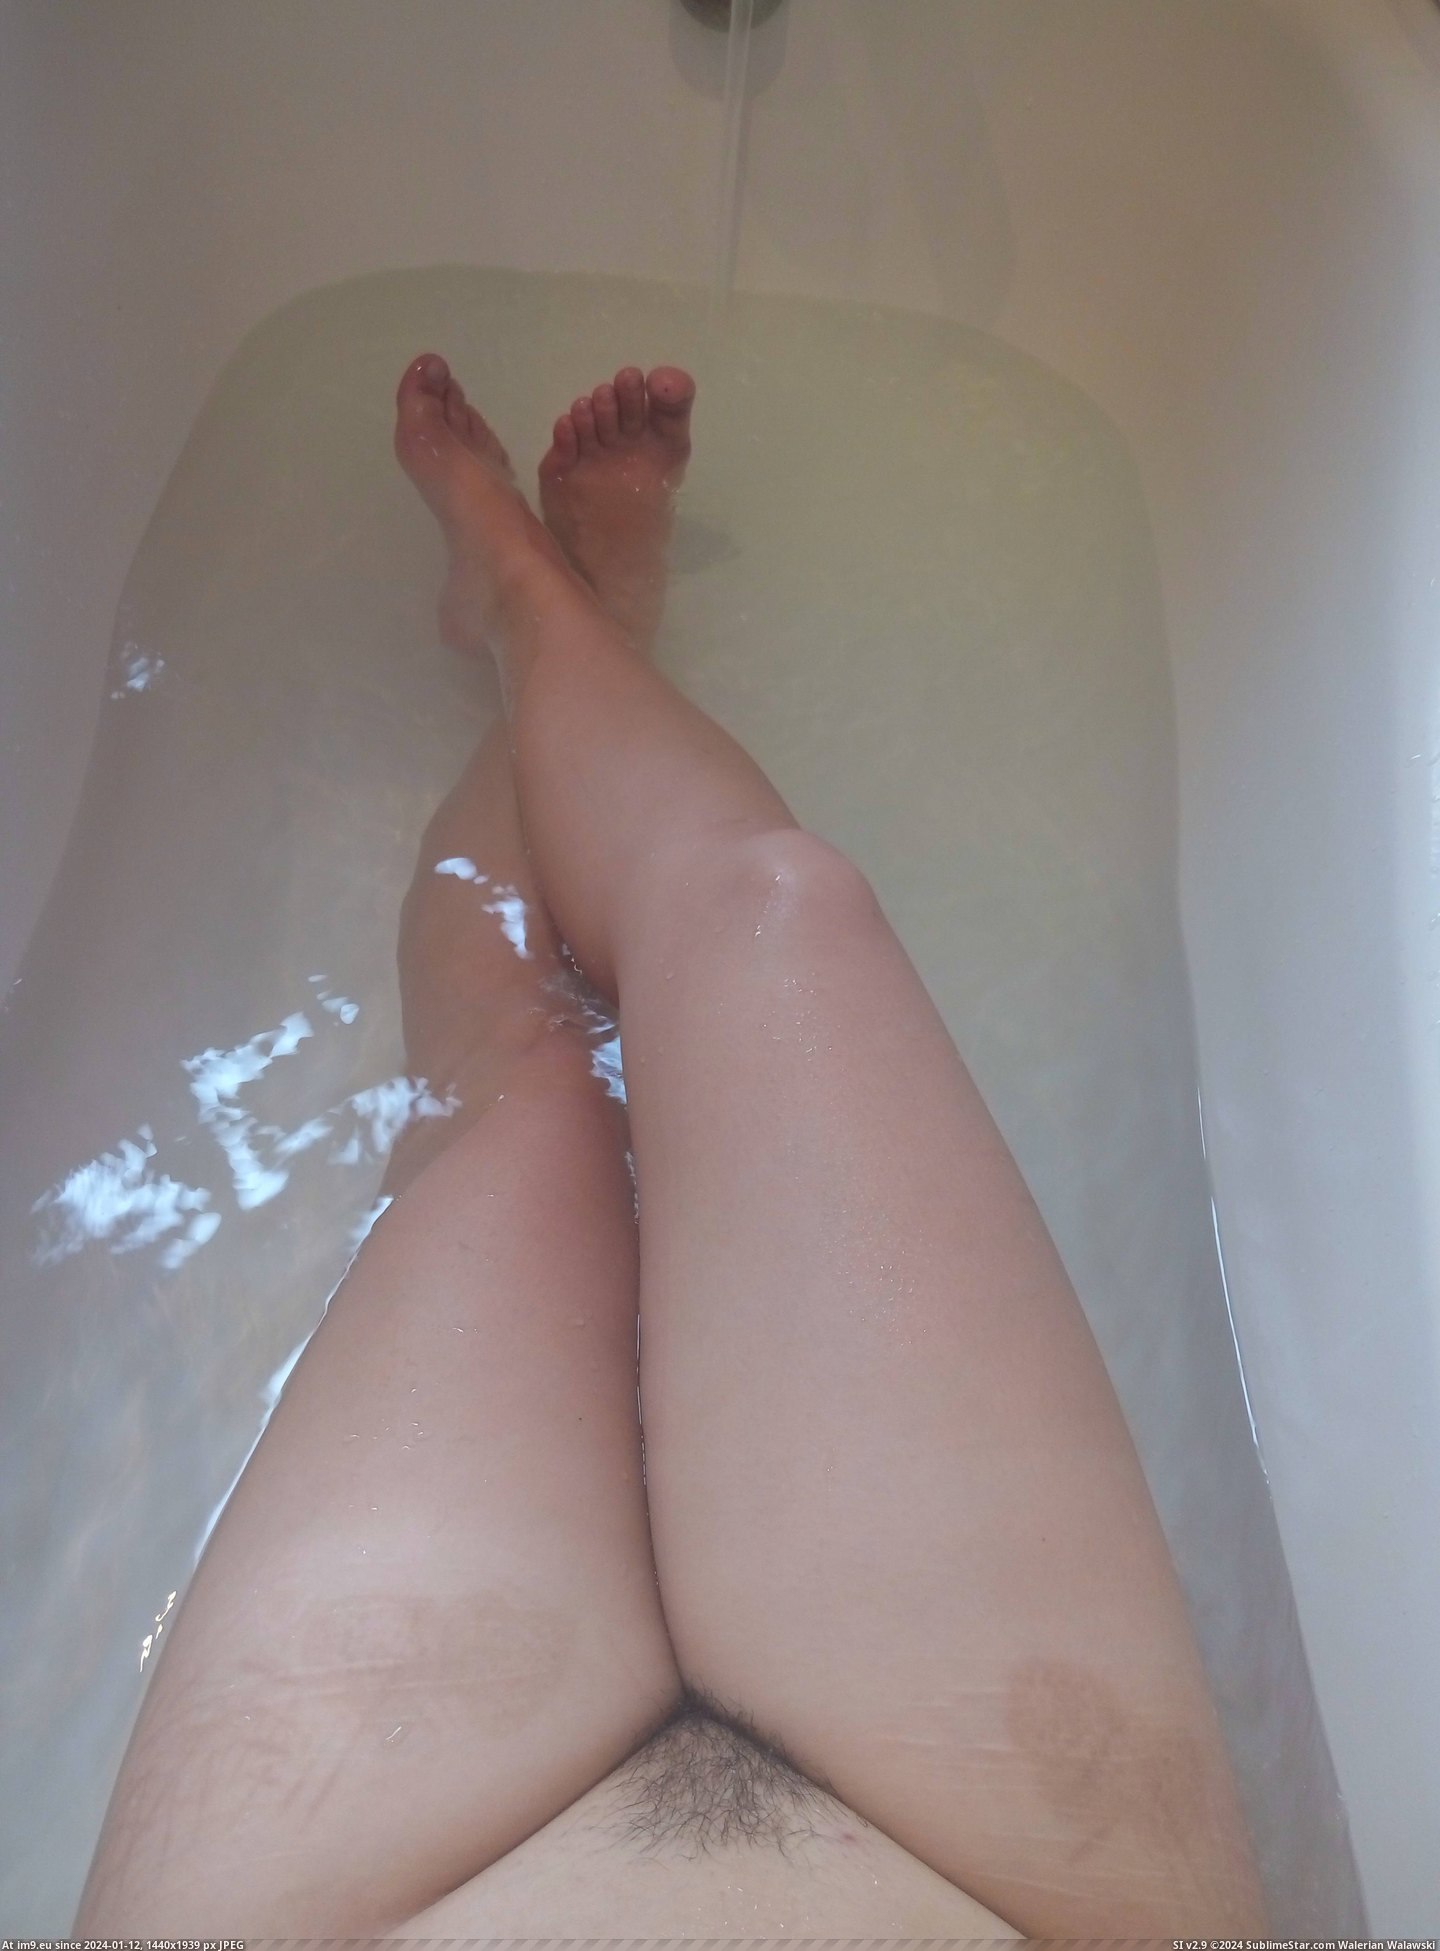 #Nsfw #Legs #Silky #Bath #Soft [Nsfw] My legs are especially soft and silky after a bath Pic. (Image of album My r/NSFW favs))